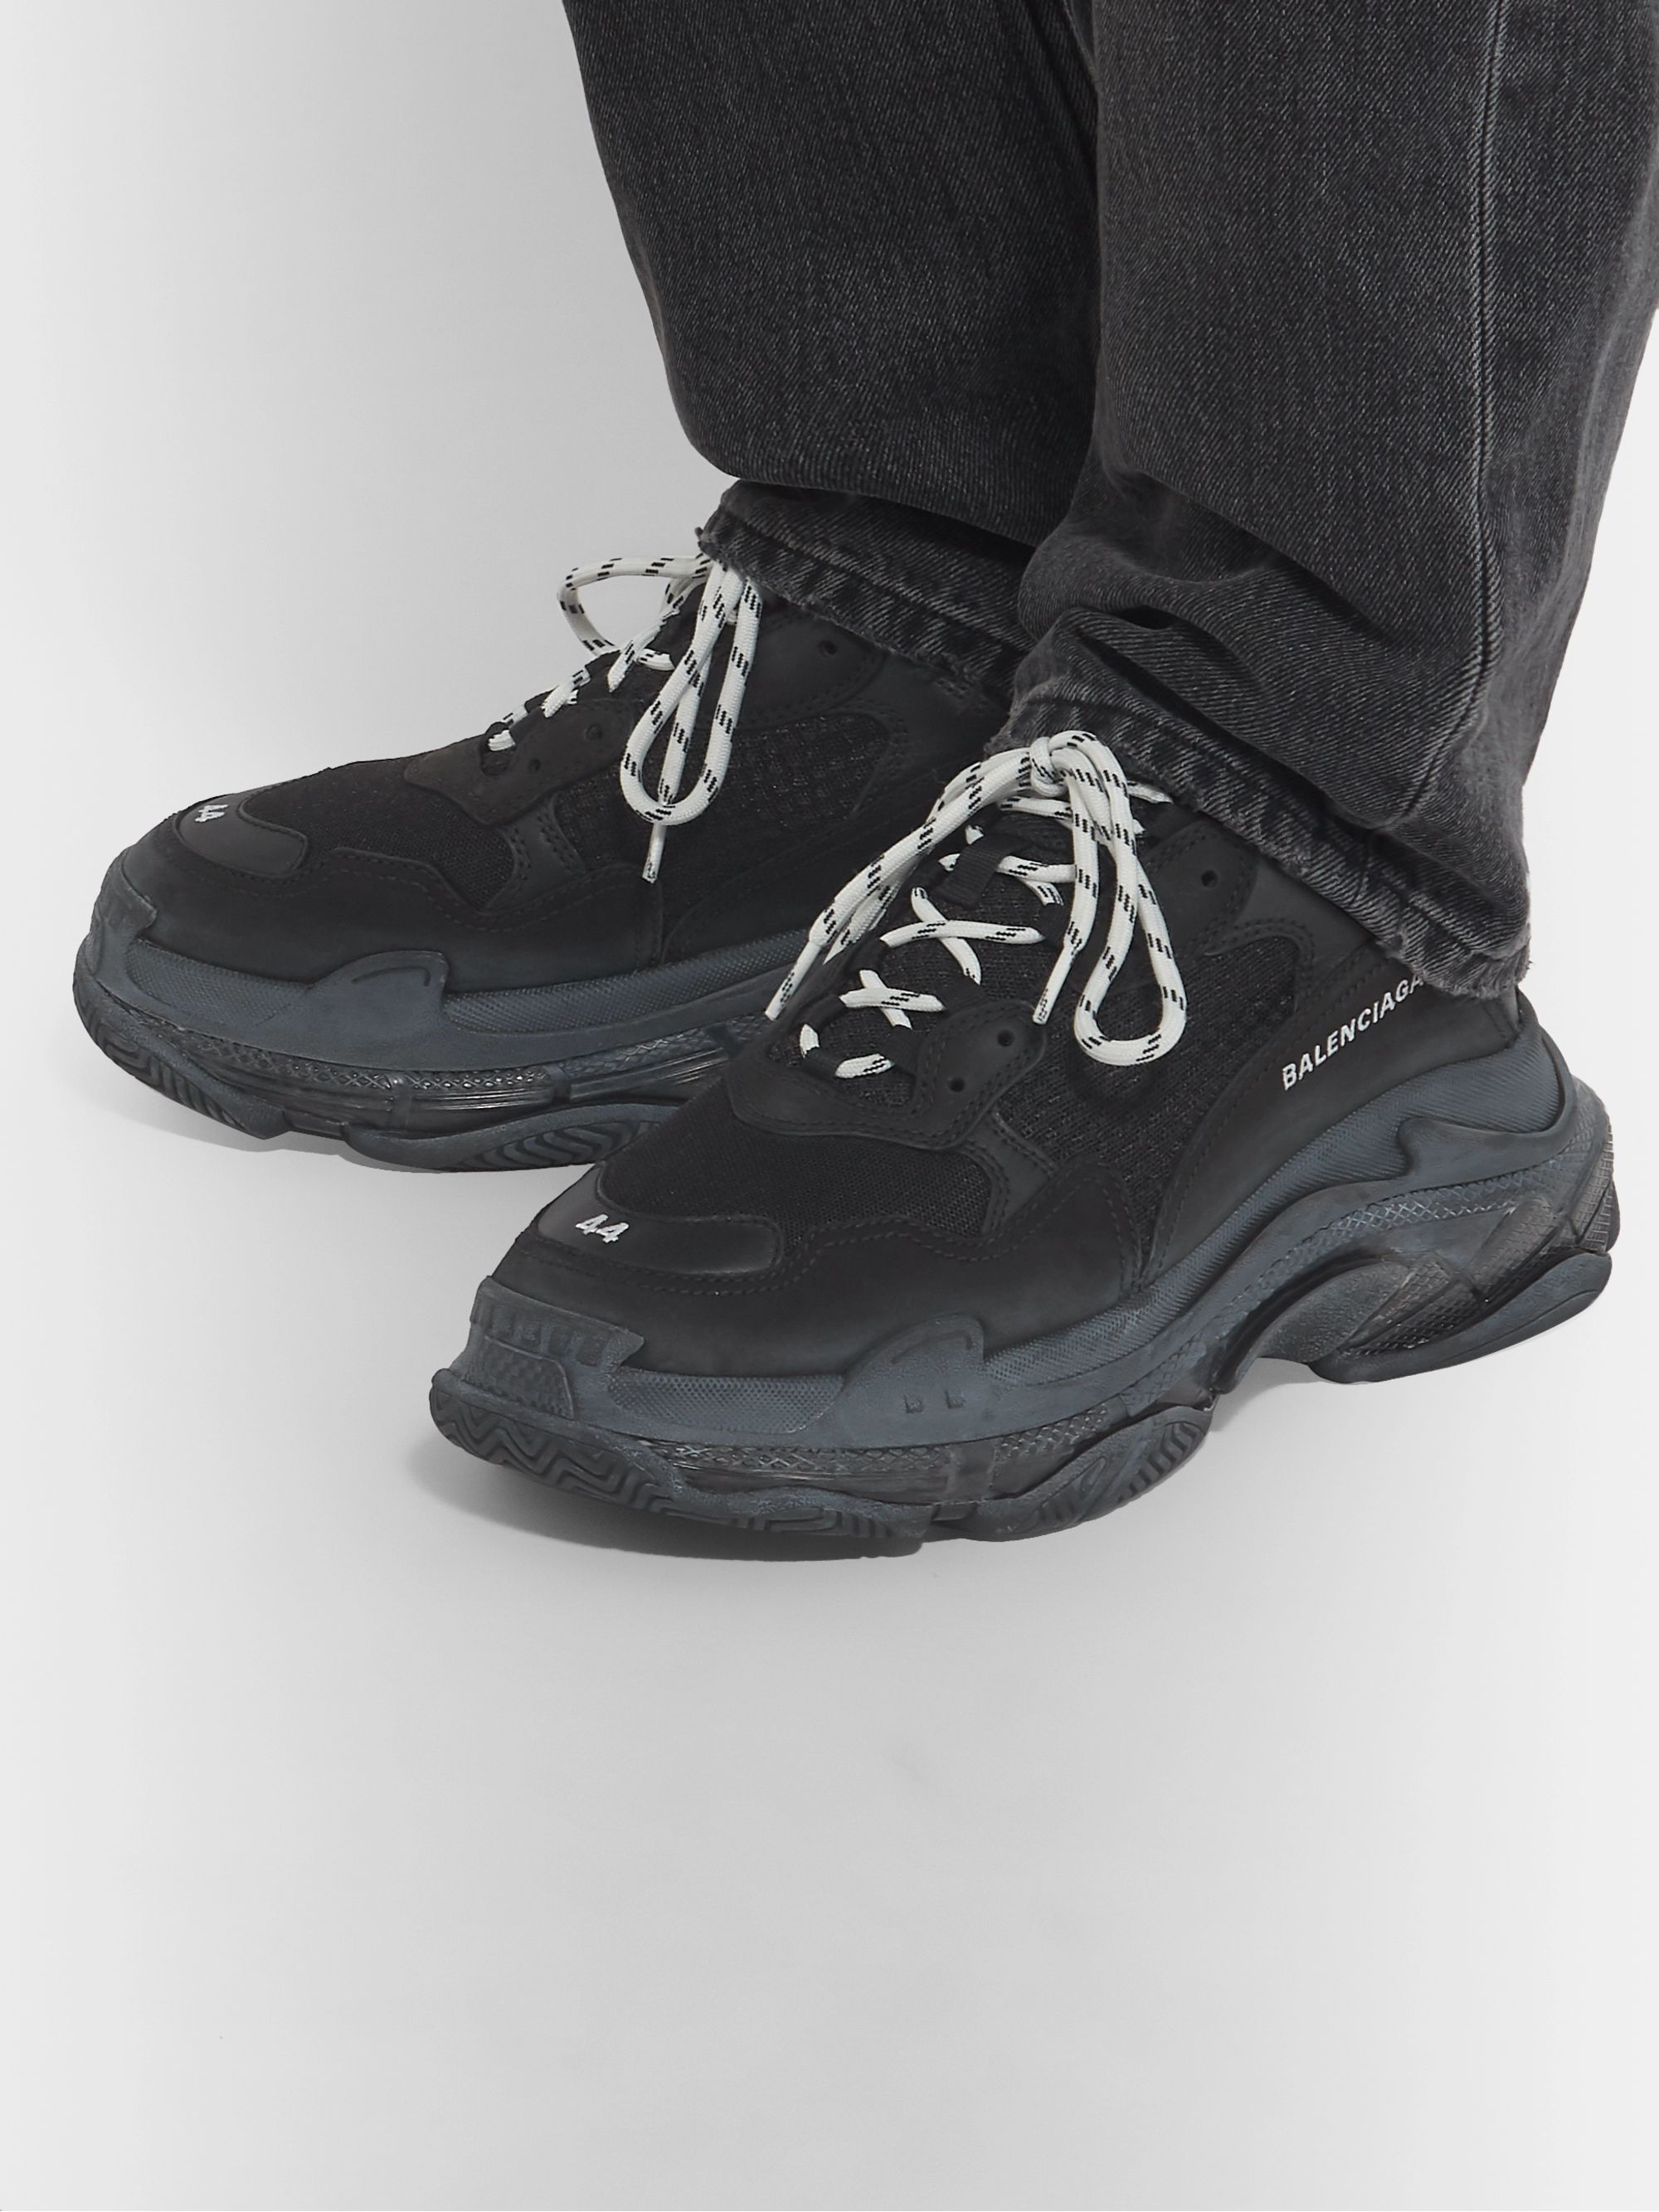 How does Balenciaga Triple S fit Sneakers Reddit